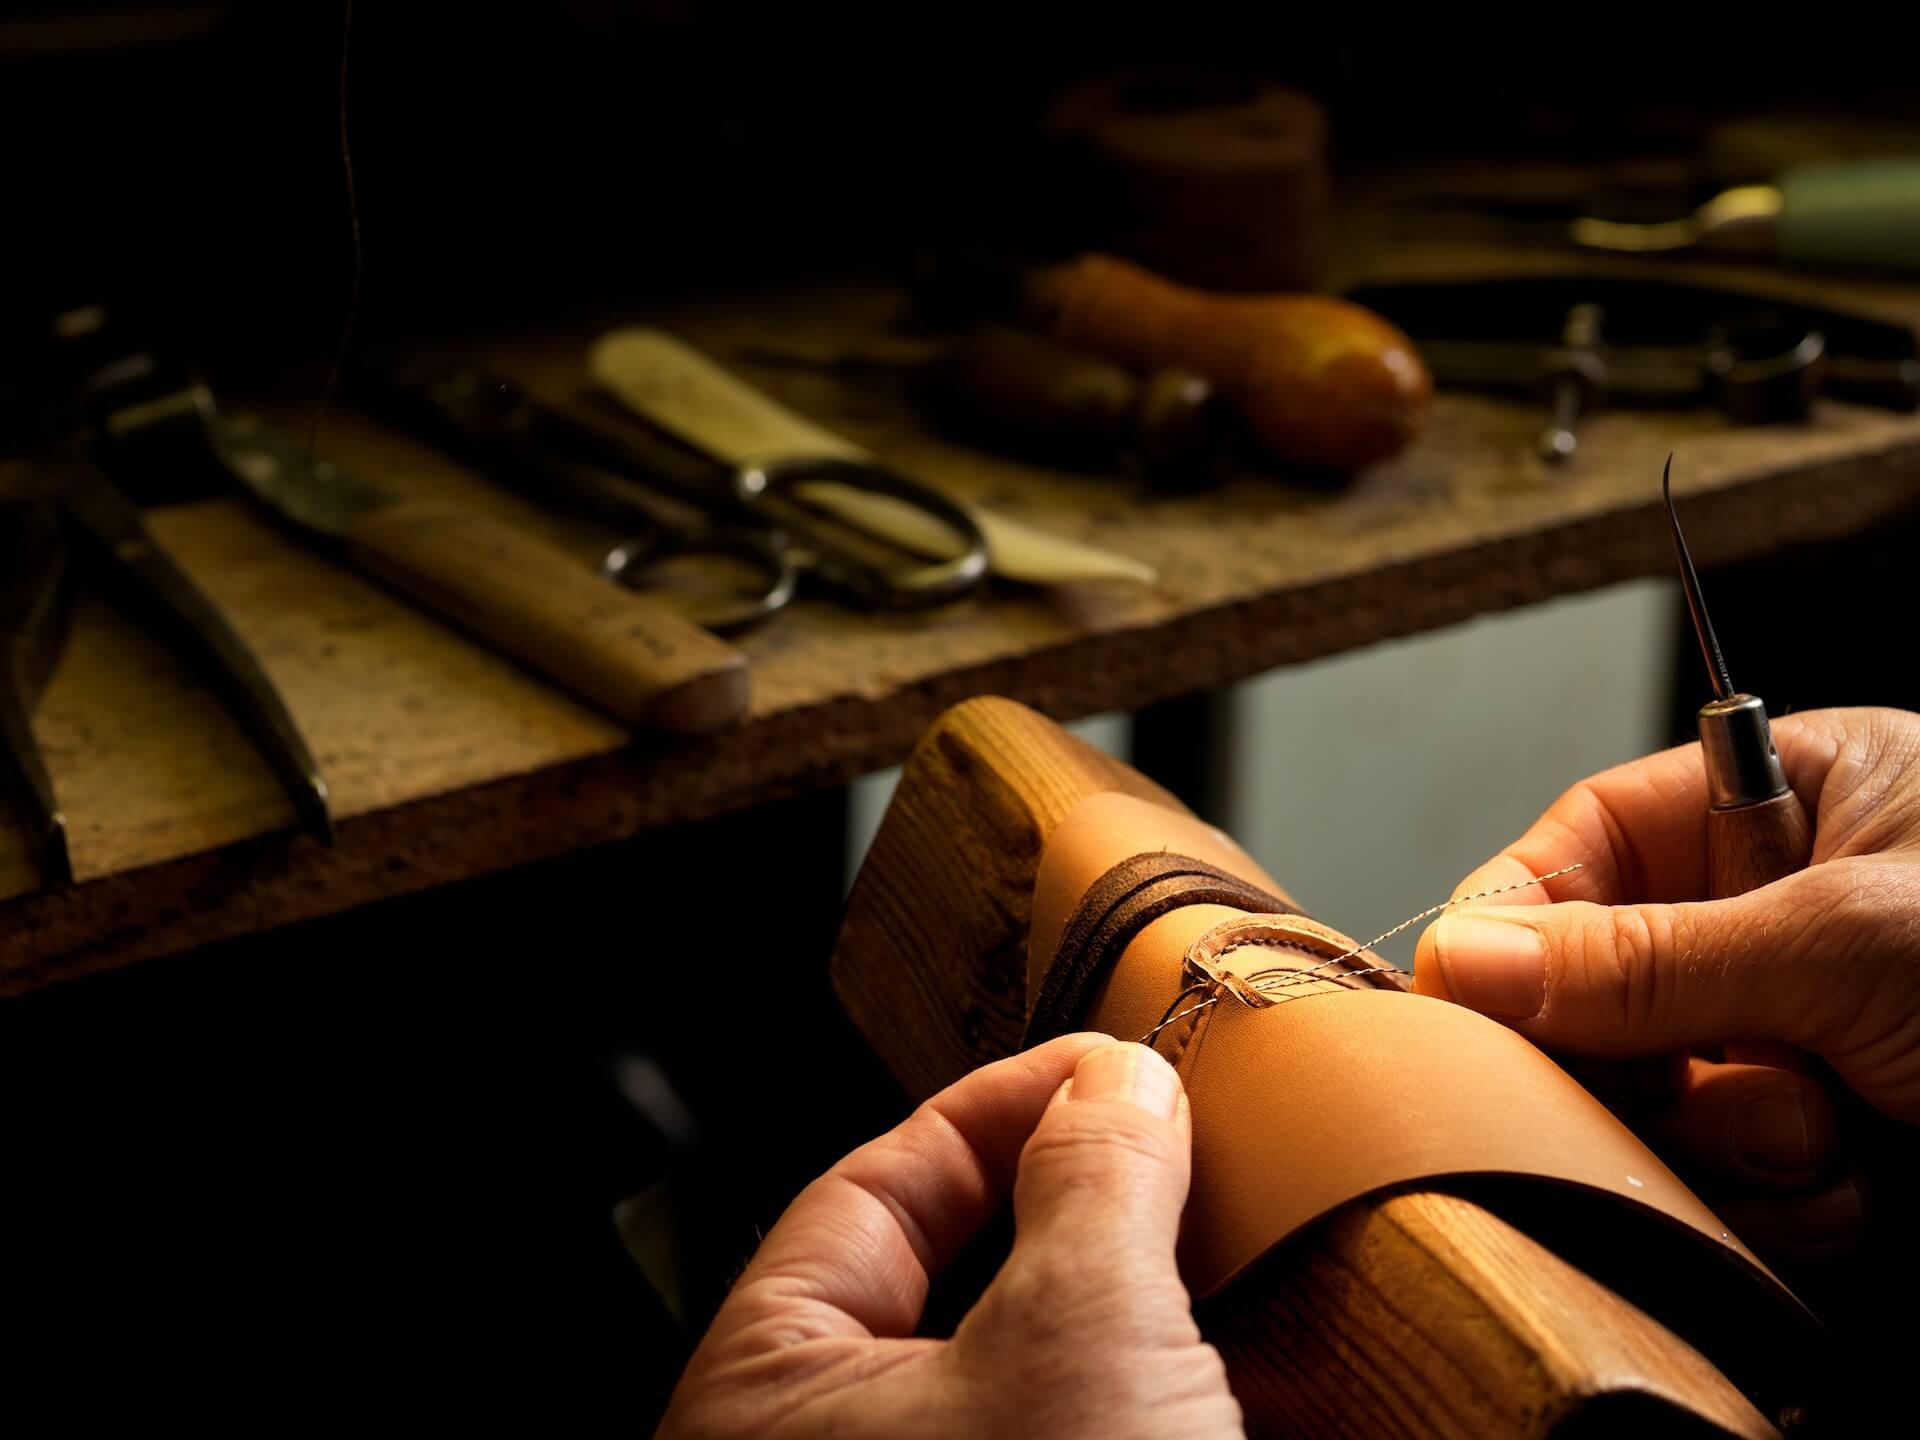 Shoe leather being stitched